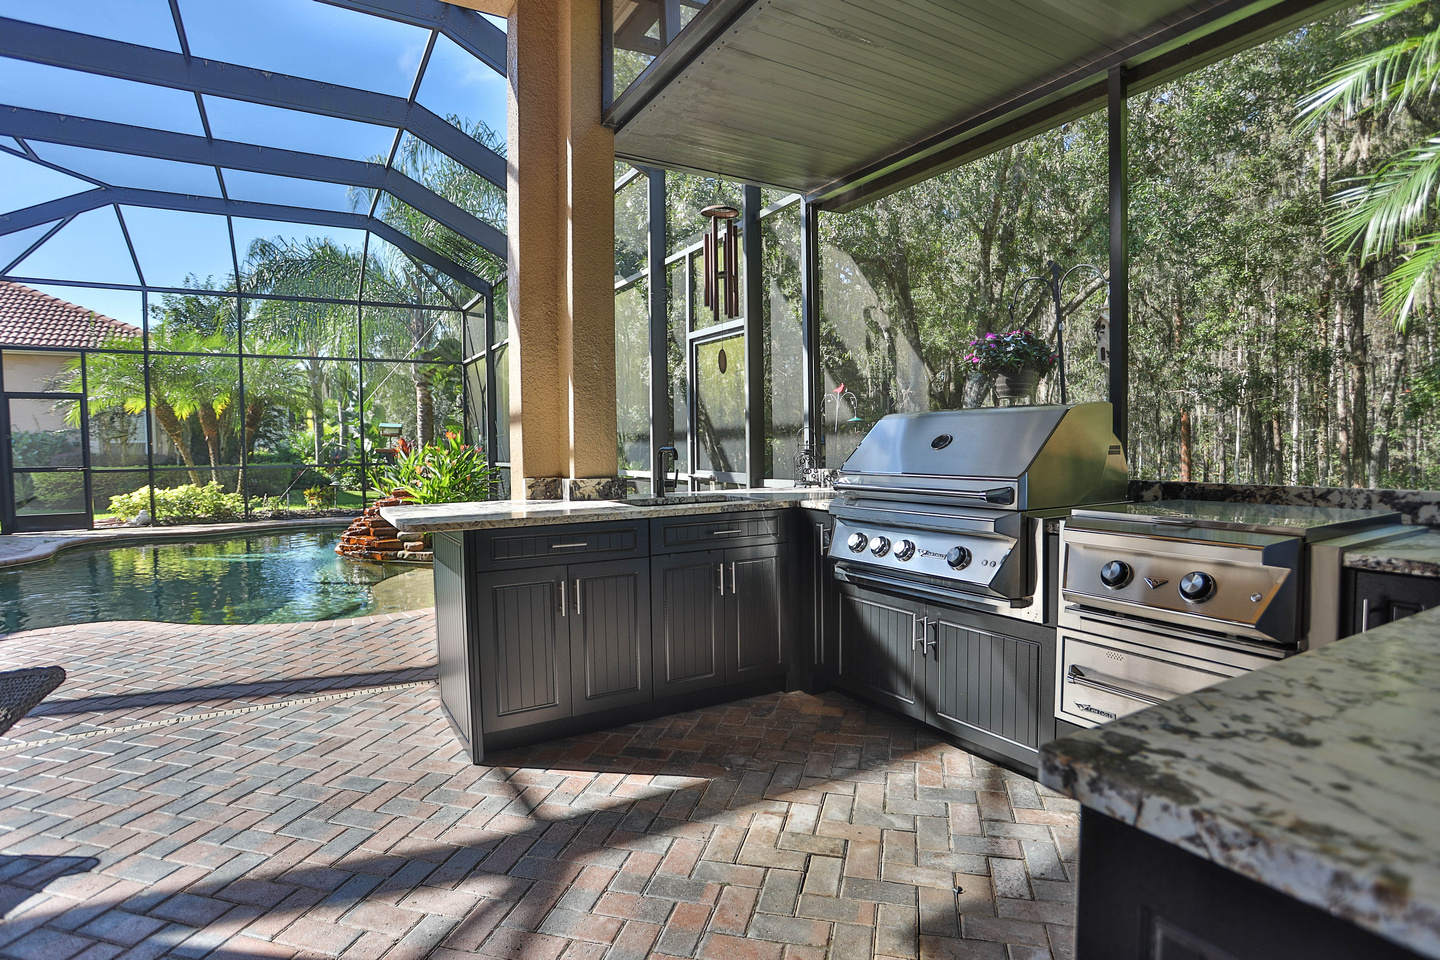 5 Reasons Why You Need an Outdoor Kitchen this Spring